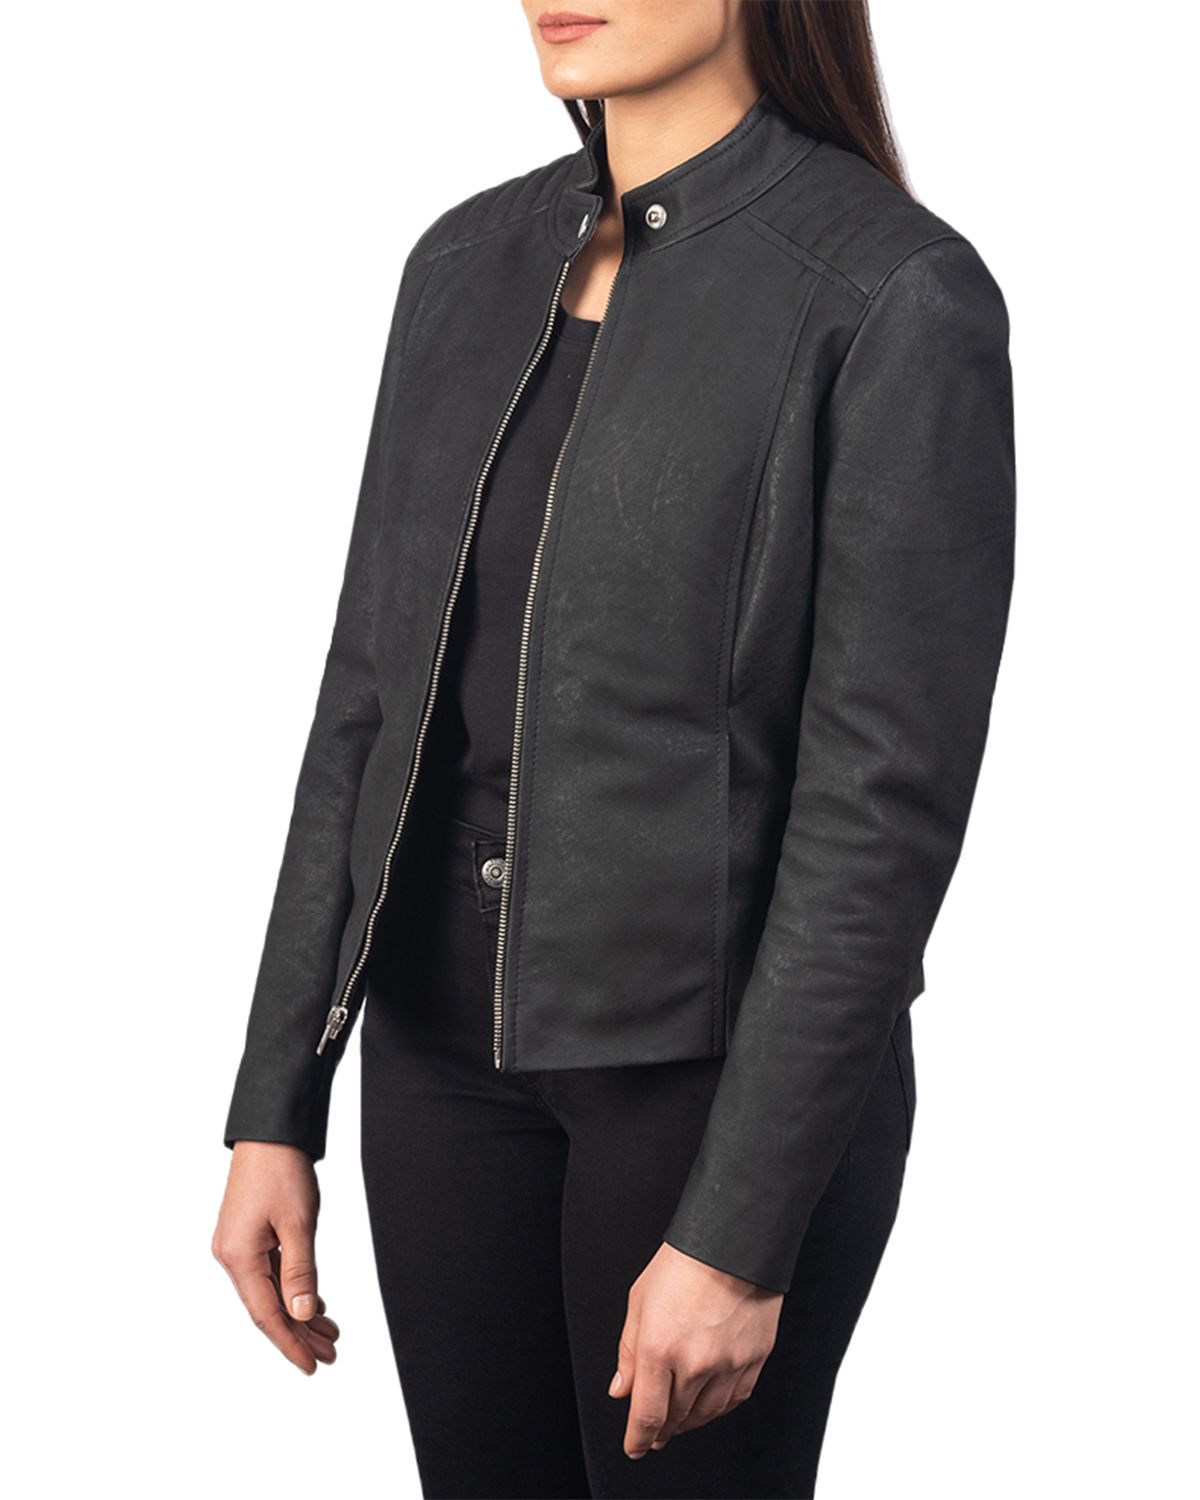 Womens Slim Fit Leather Jacket With Quilted Shoulders | Elite